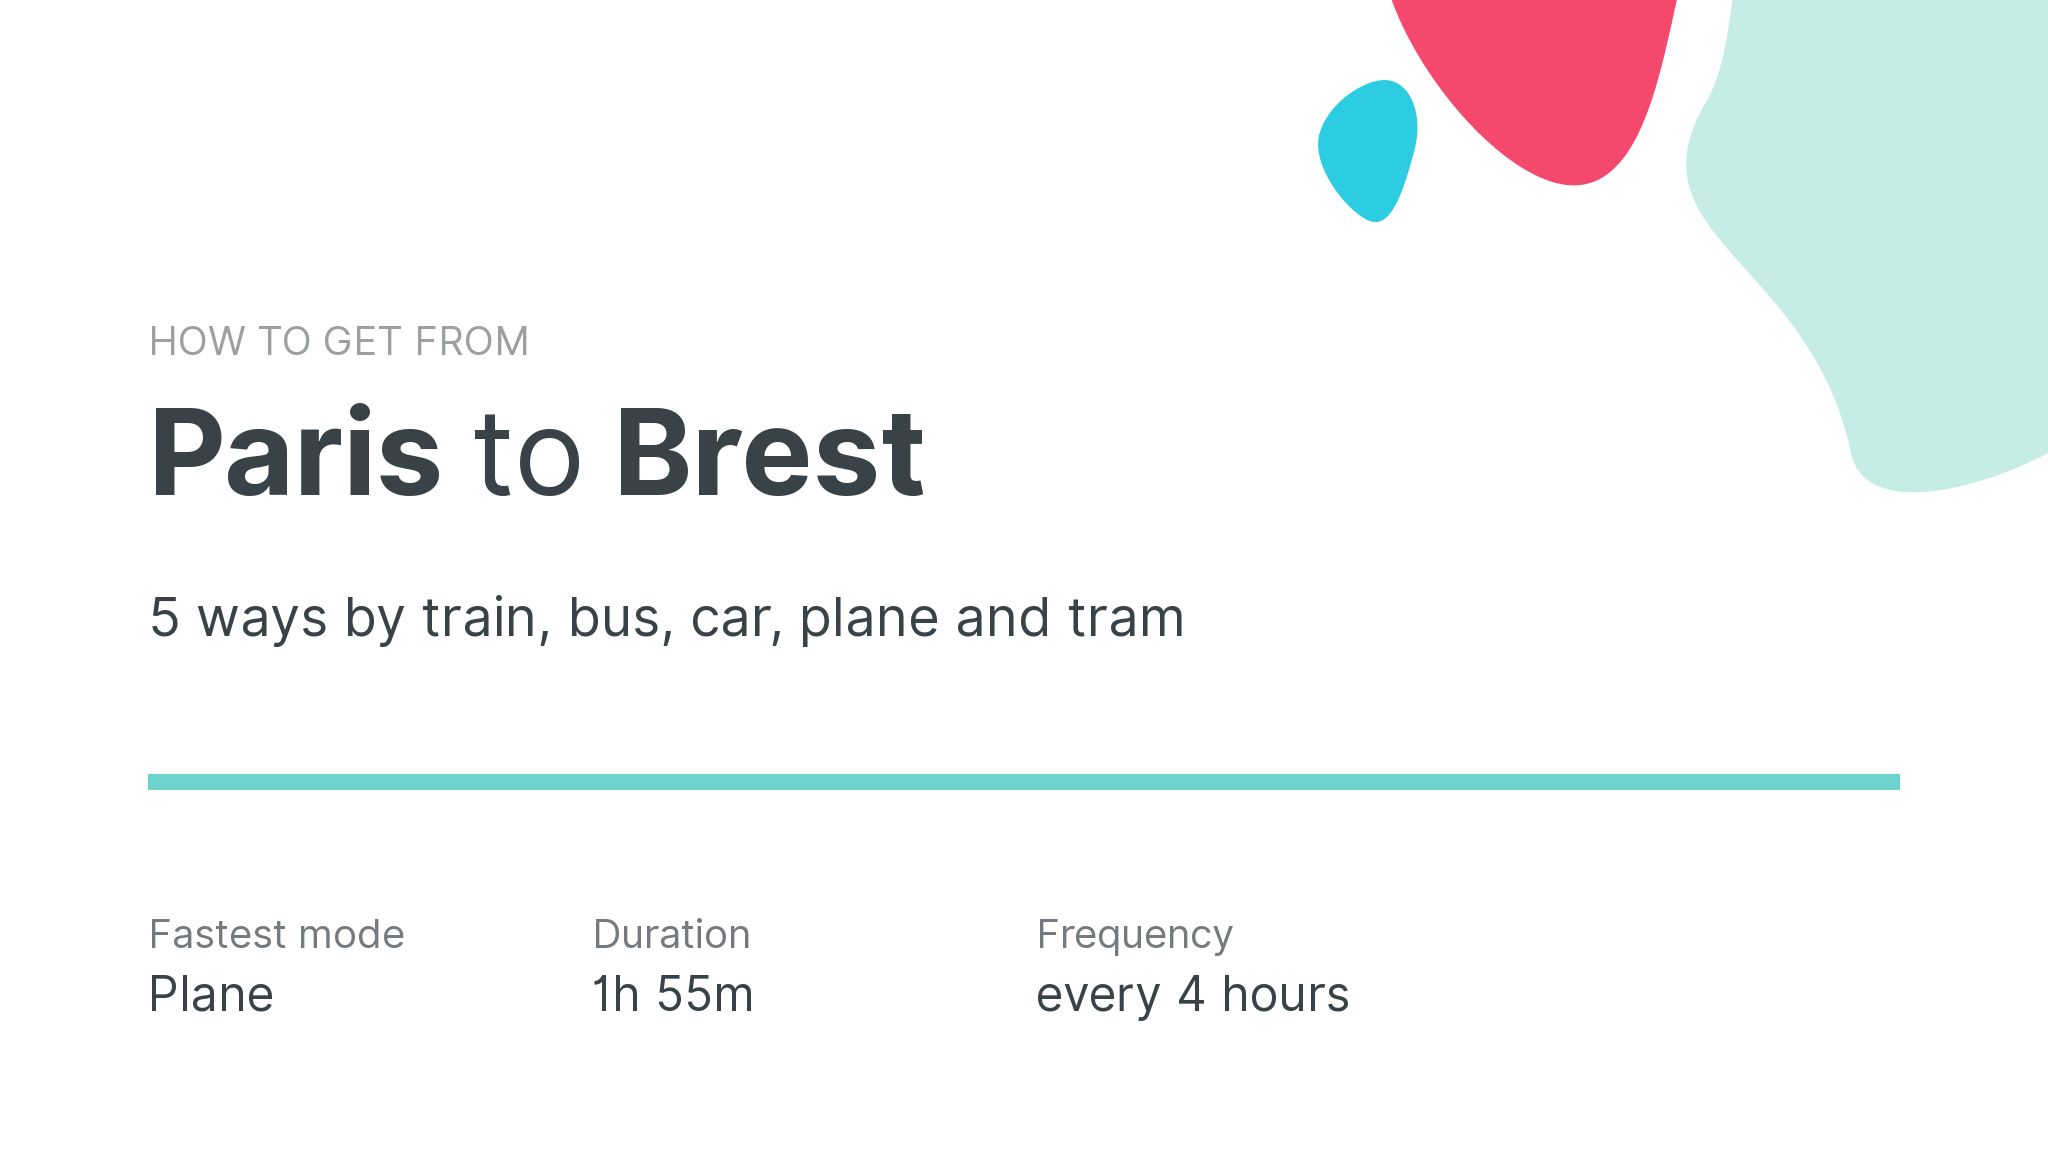 How do I get from Paris to Brest